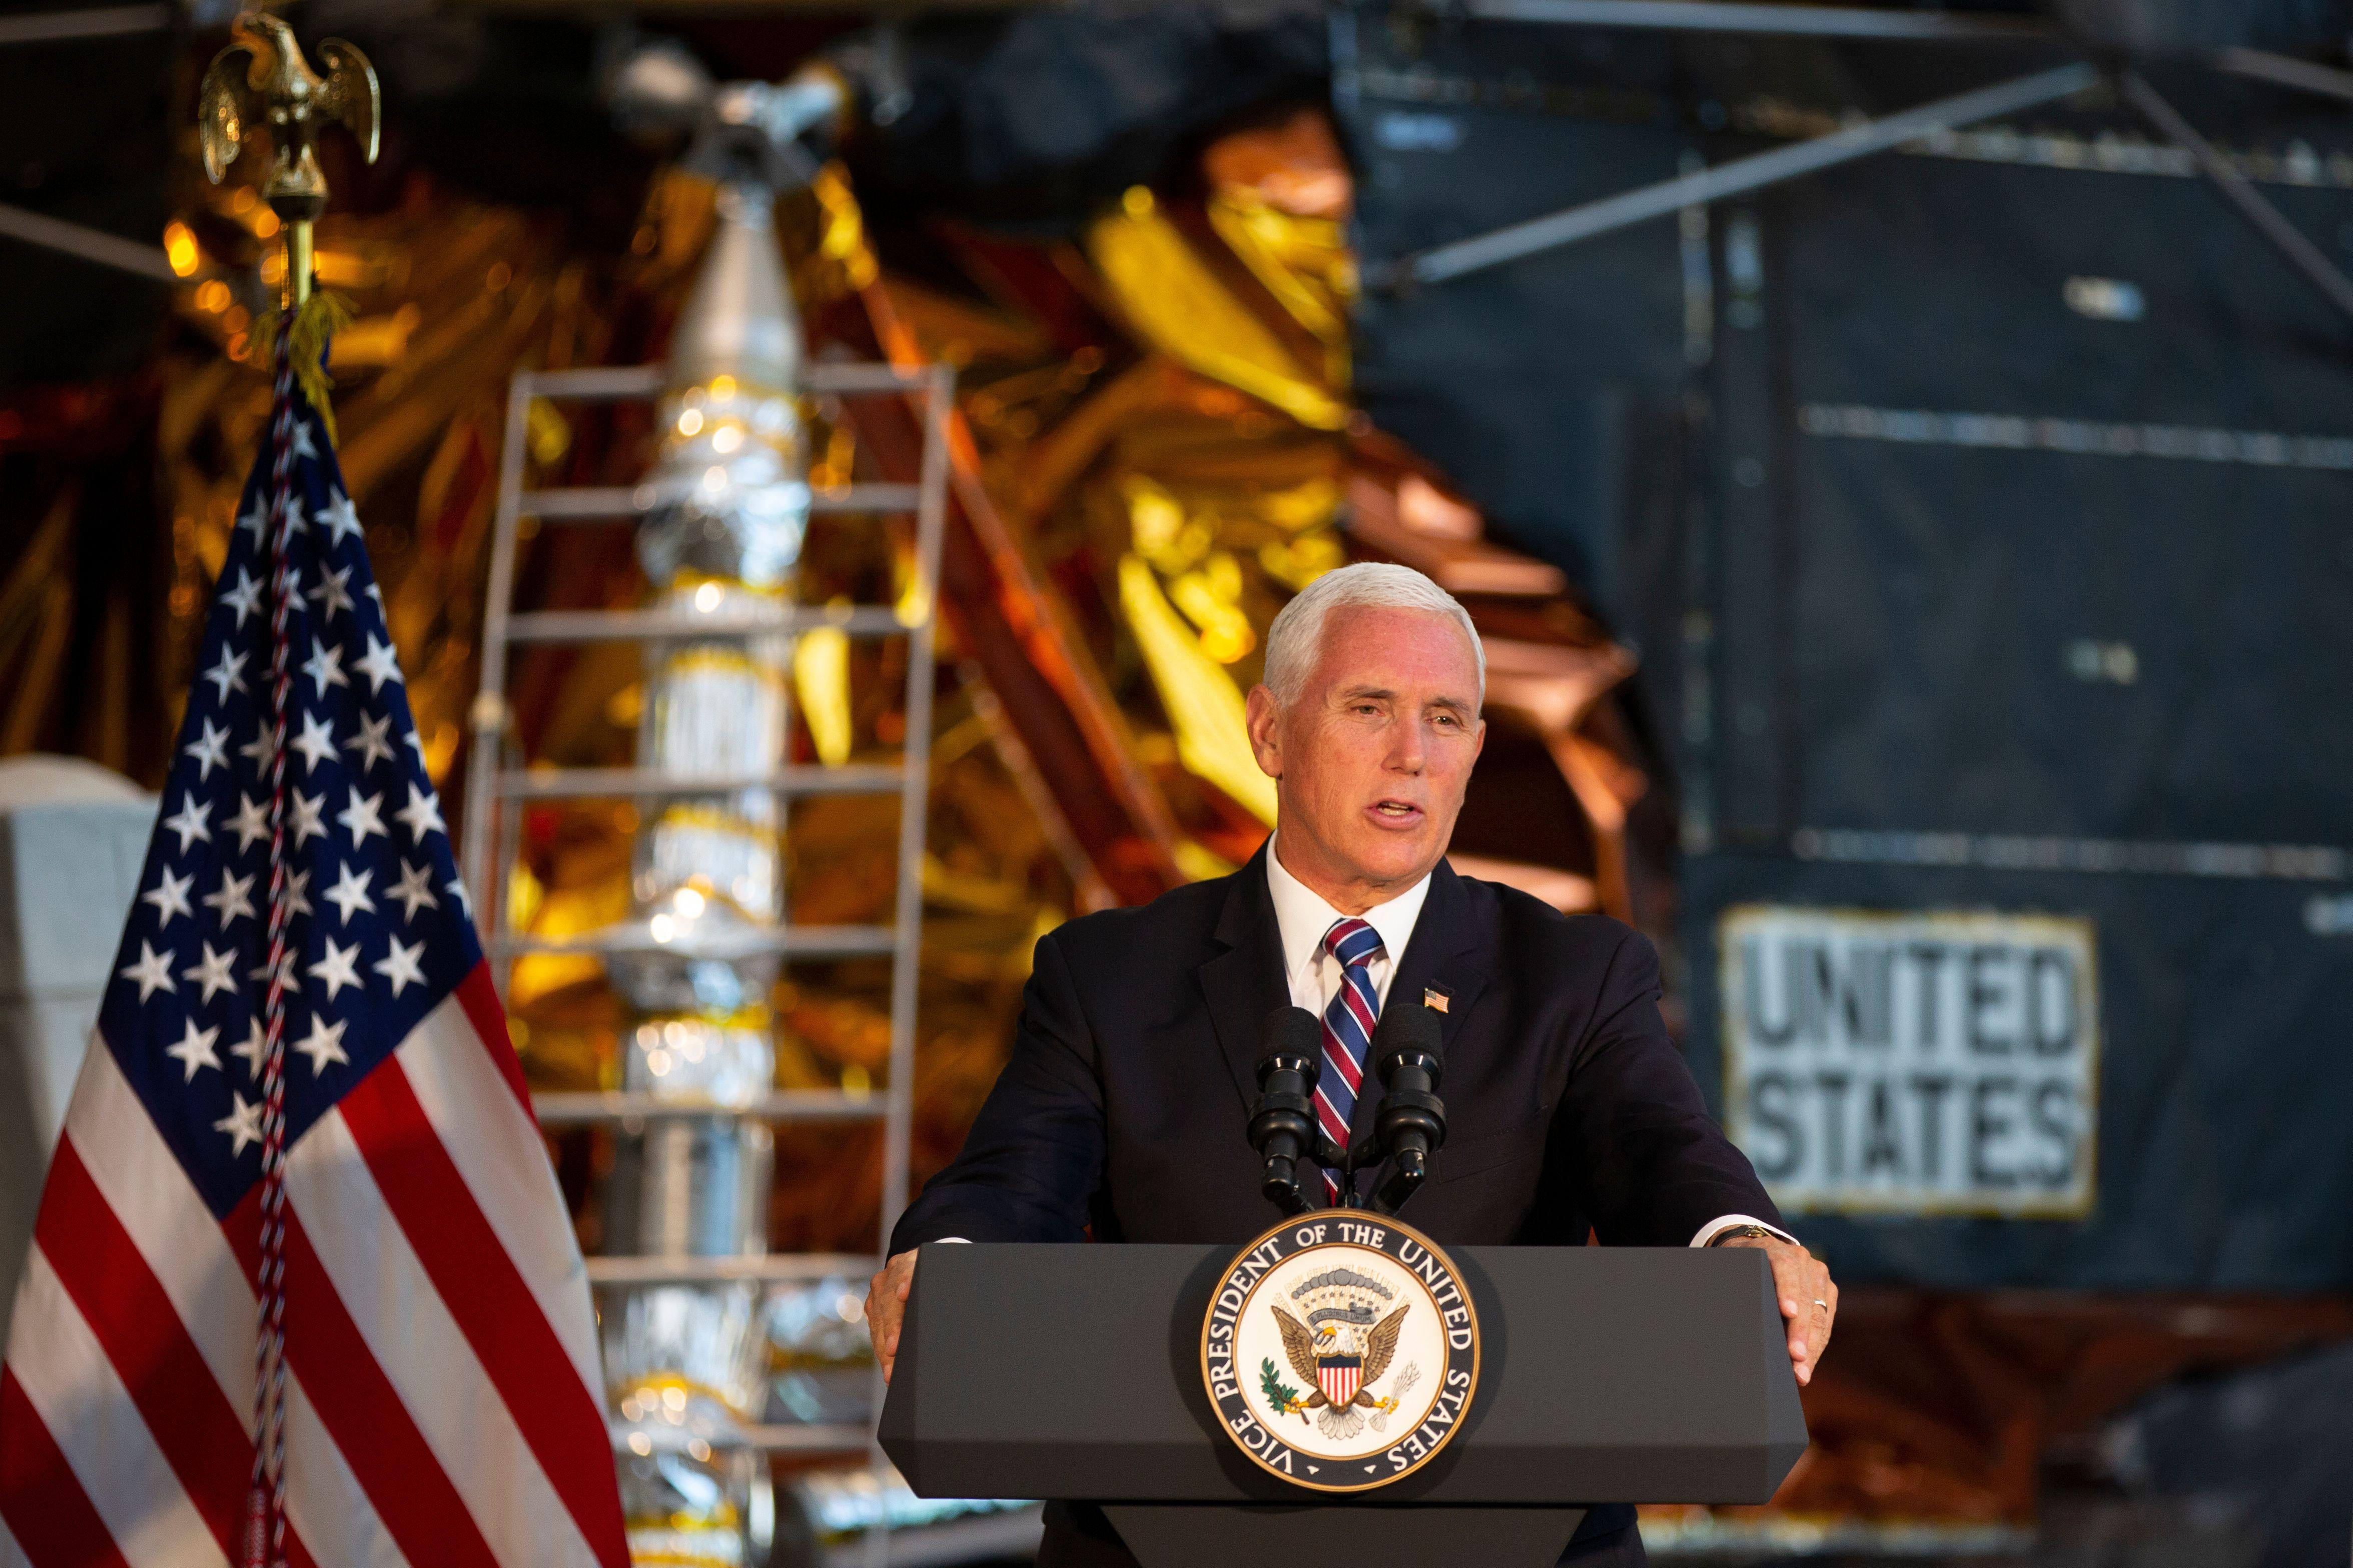 Pence stands before a podium, with the American flag and spacecraft in the background.